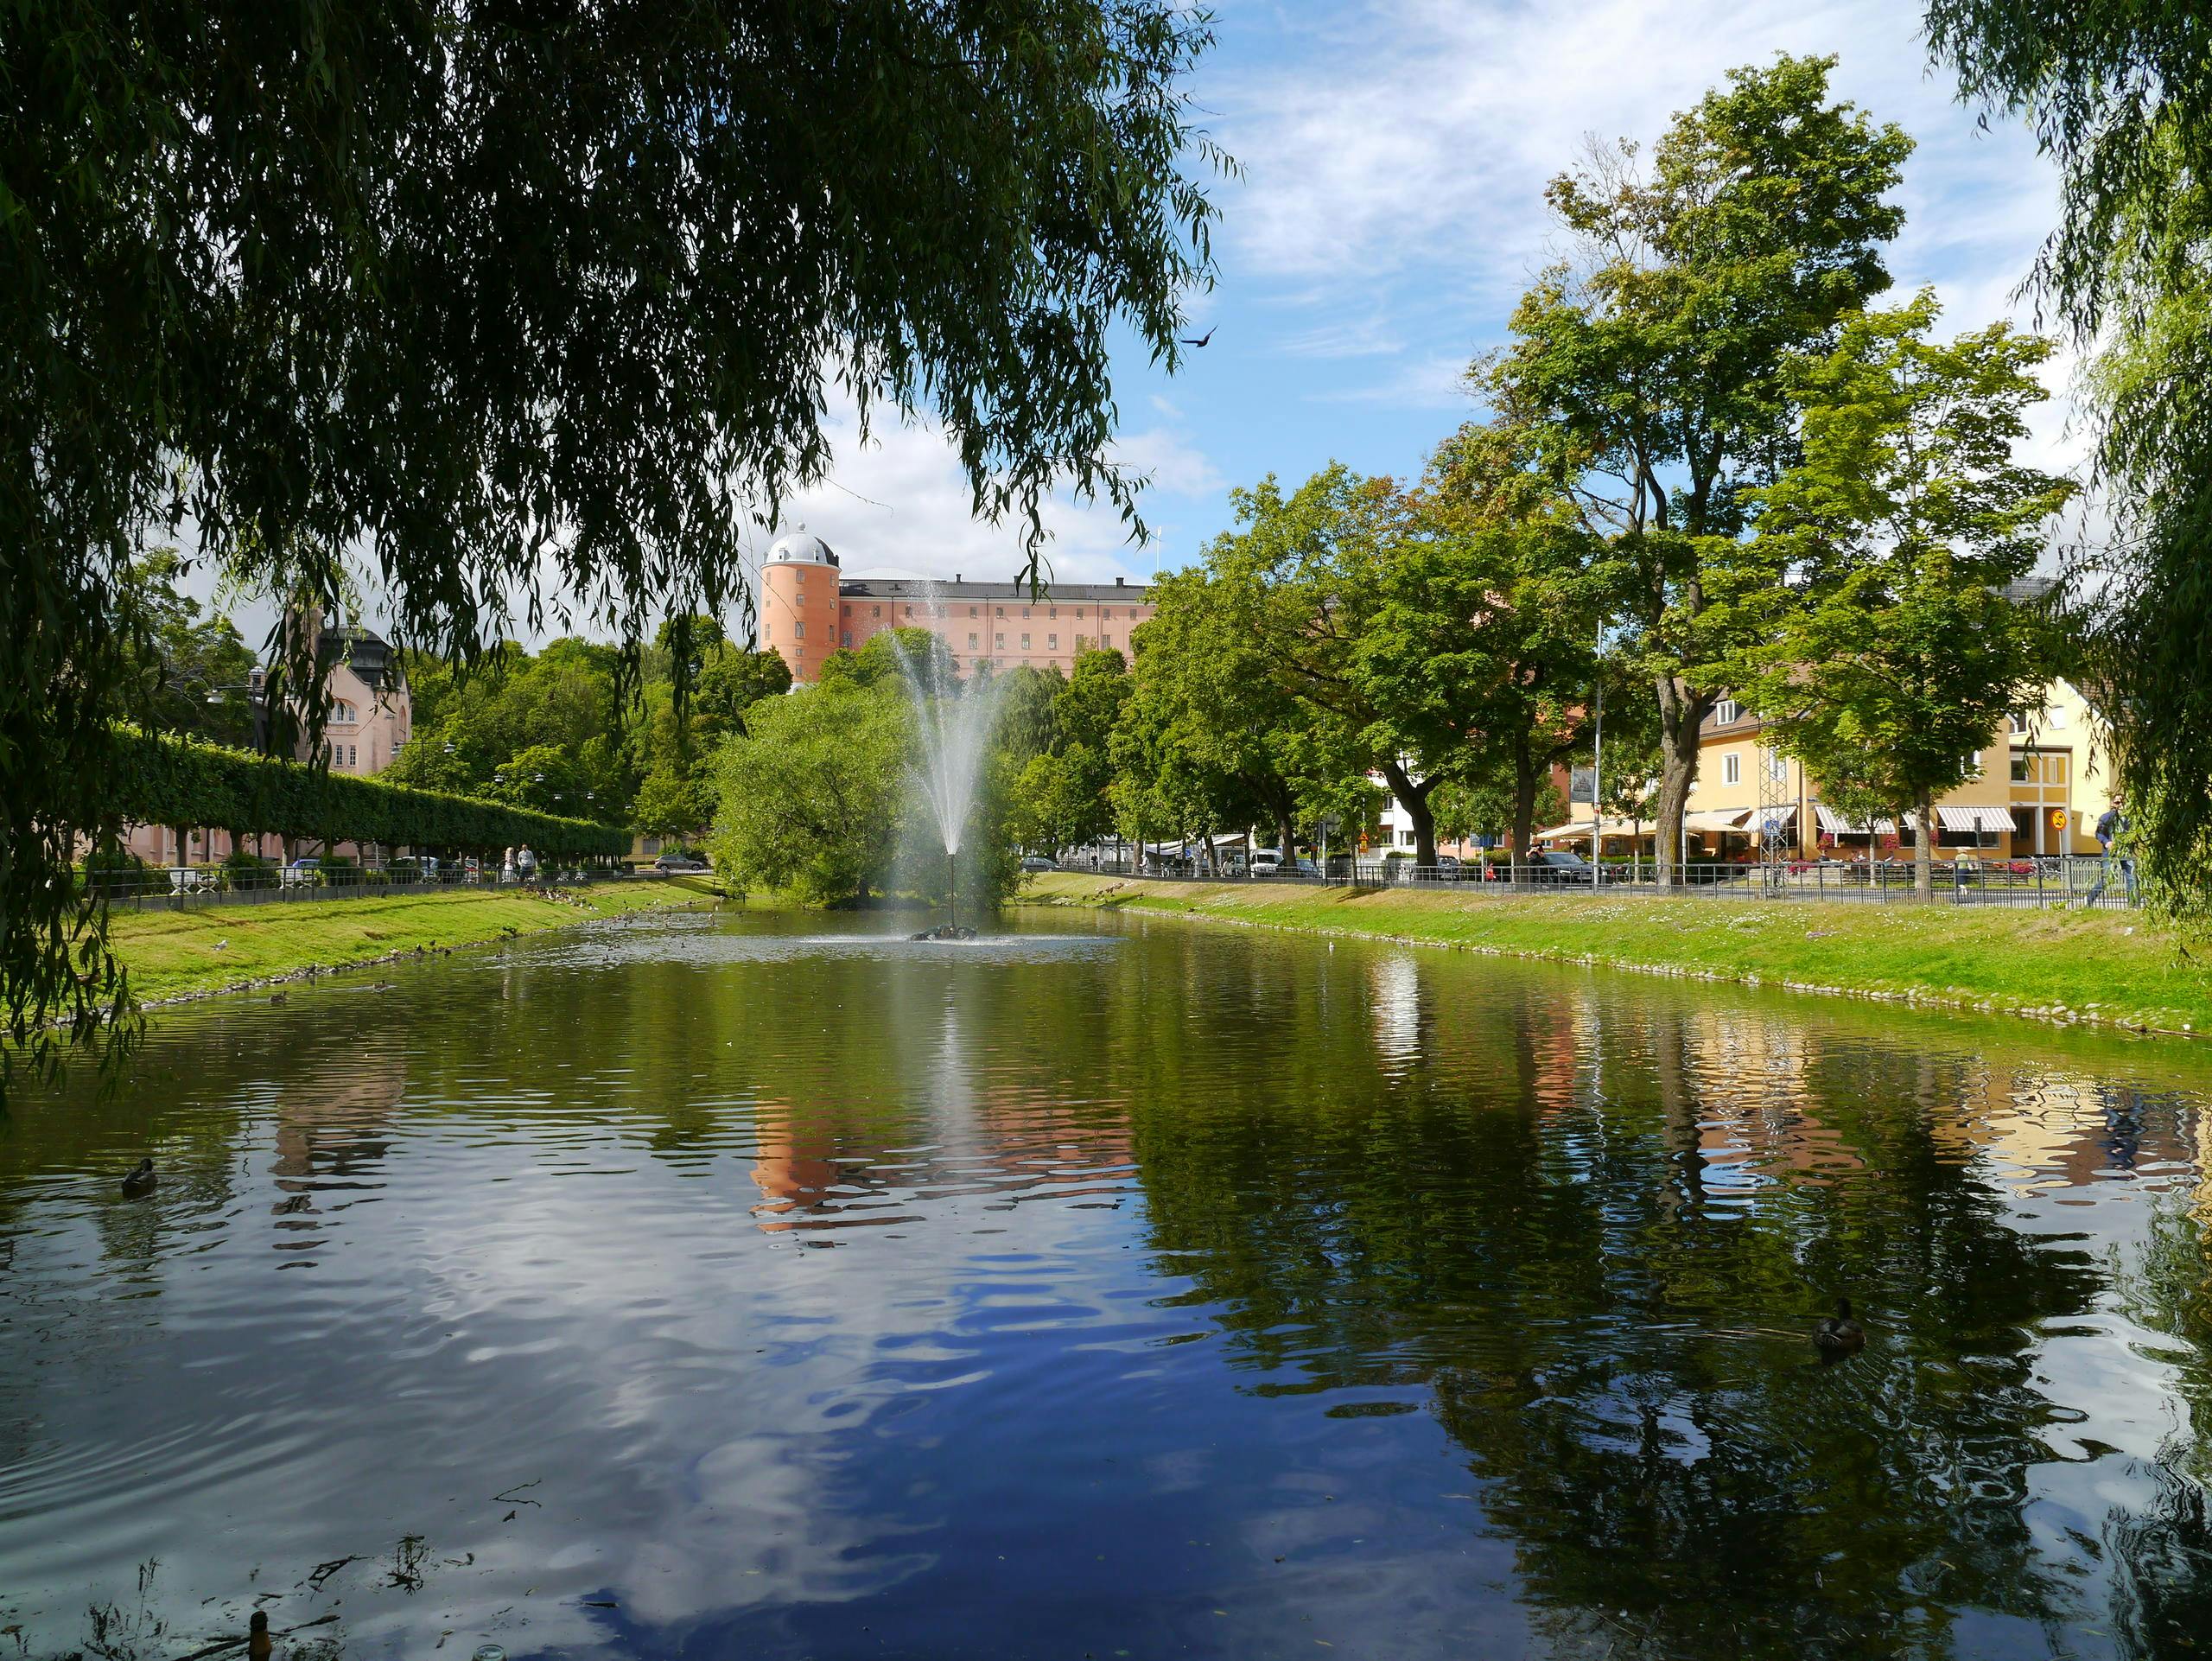 Learn about the reformation king of Uppsala on a guided walking tour Musement